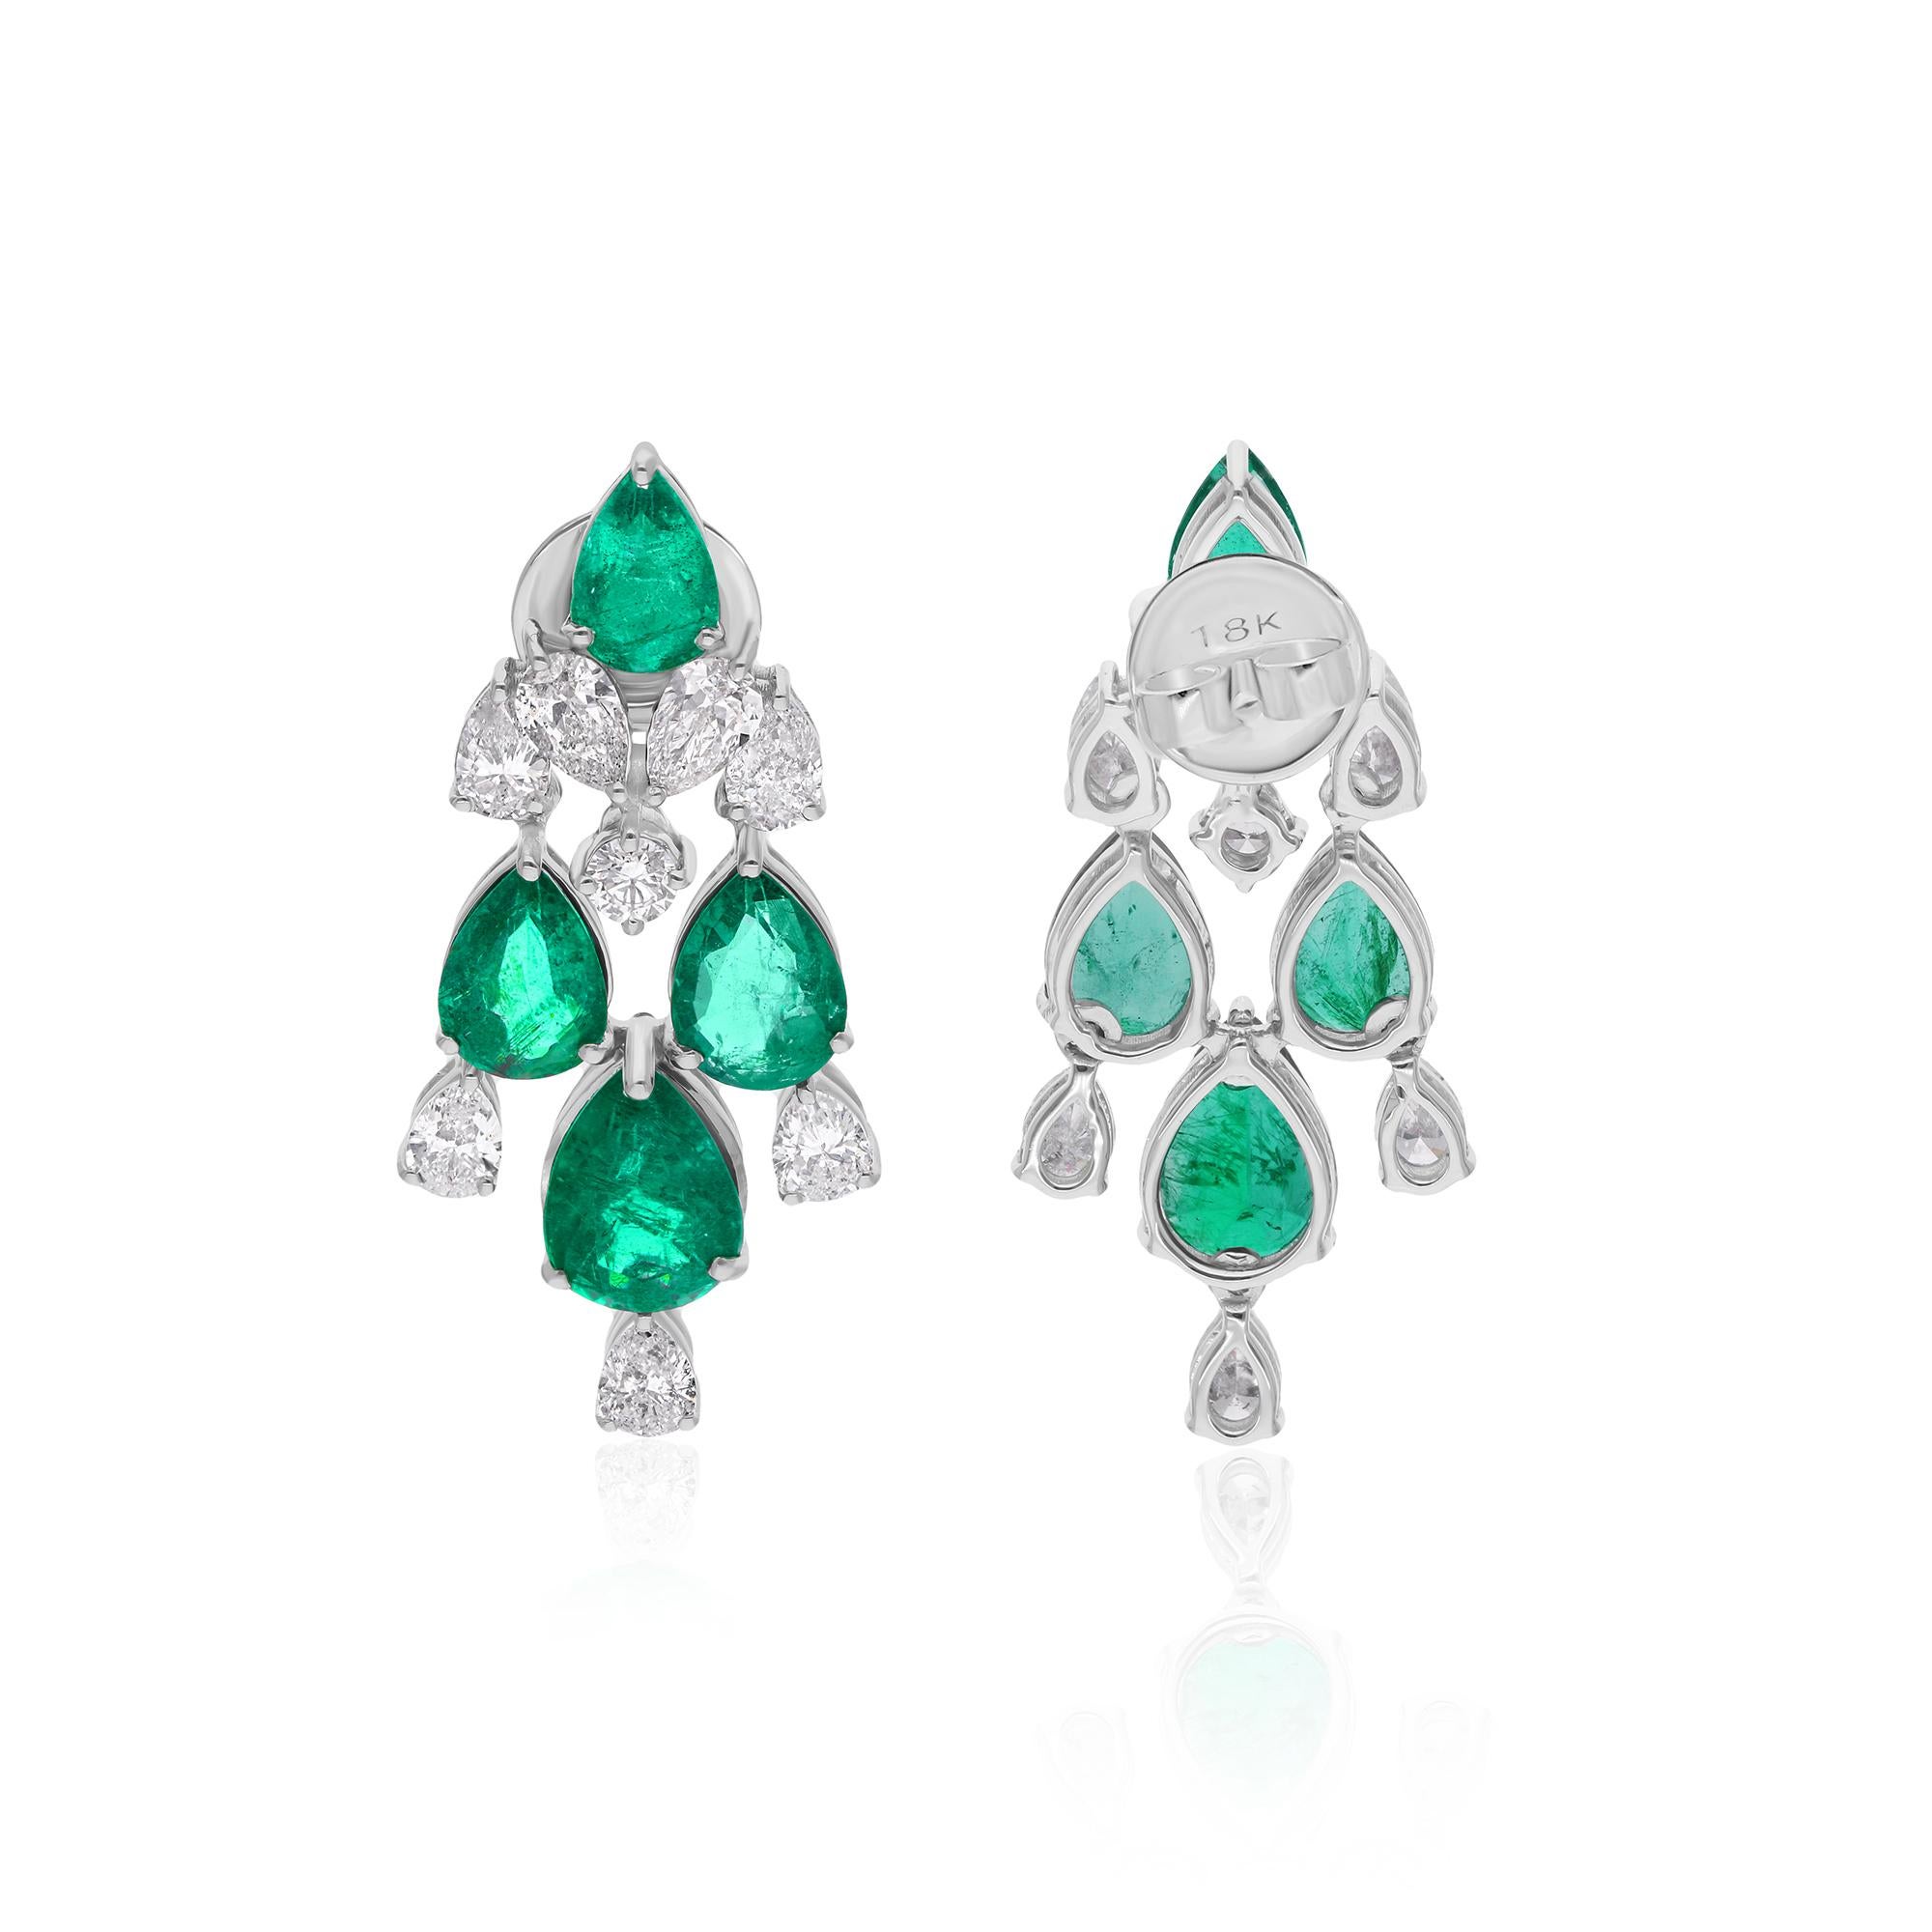 Indulge in the captivating allure of these exquisite Zambian Emerald Gemstone Earrings, a testament to timeless elegance and unparalleled craftsmanship. Crafted with the utmost precision and care, these earrings boast a pair of lush, verdant Zambian